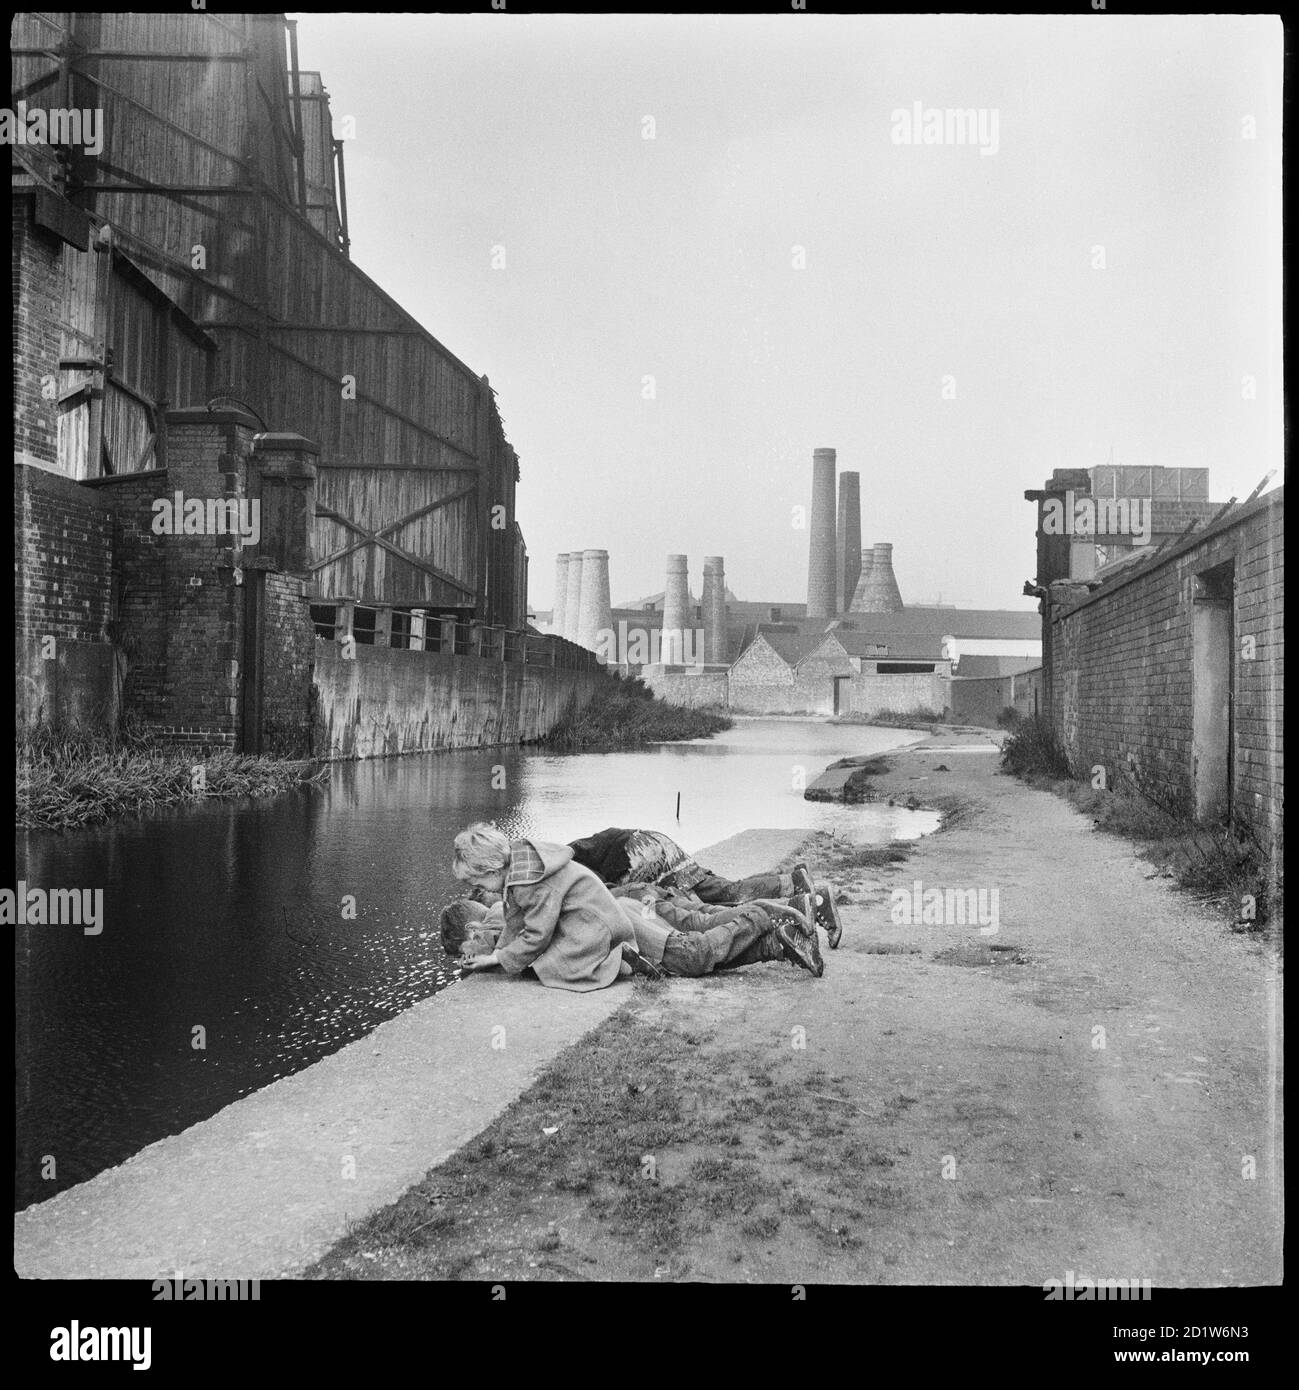 Children lying on the towpath looking into the waters of the Caldon Canal opposite the Electricity Works with Trent Works and Westwood Mills in the background, Caldon Canal, Joiner's Square, Hanley, Stoke-on-Trent, Staffordshire, UK. Stock Photo